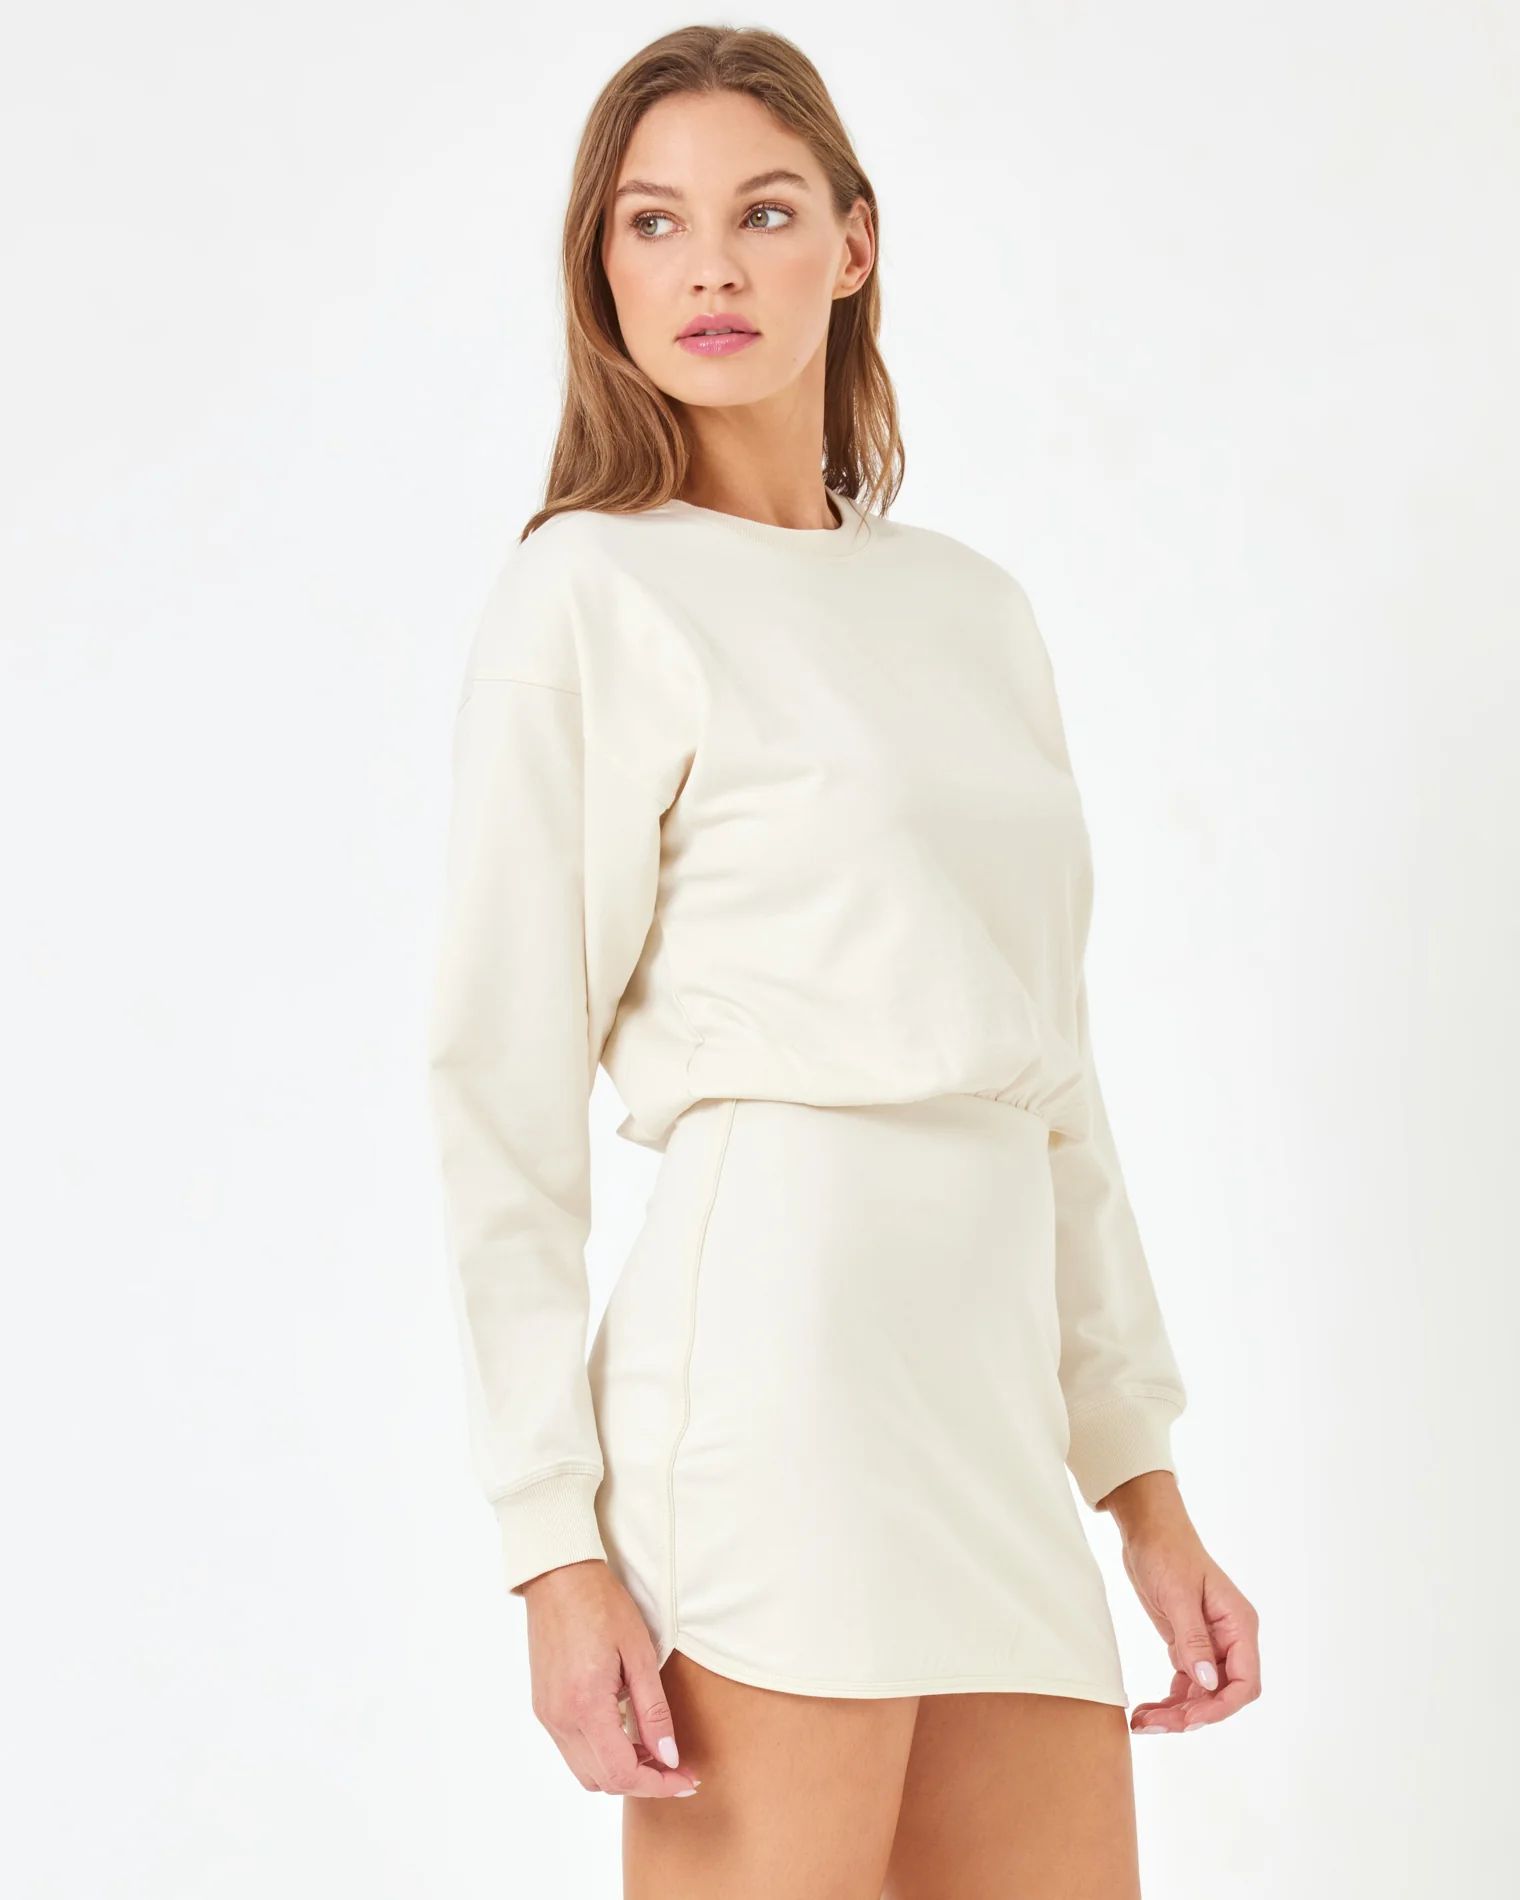 lspace x anthropologie groove dress | L*Space